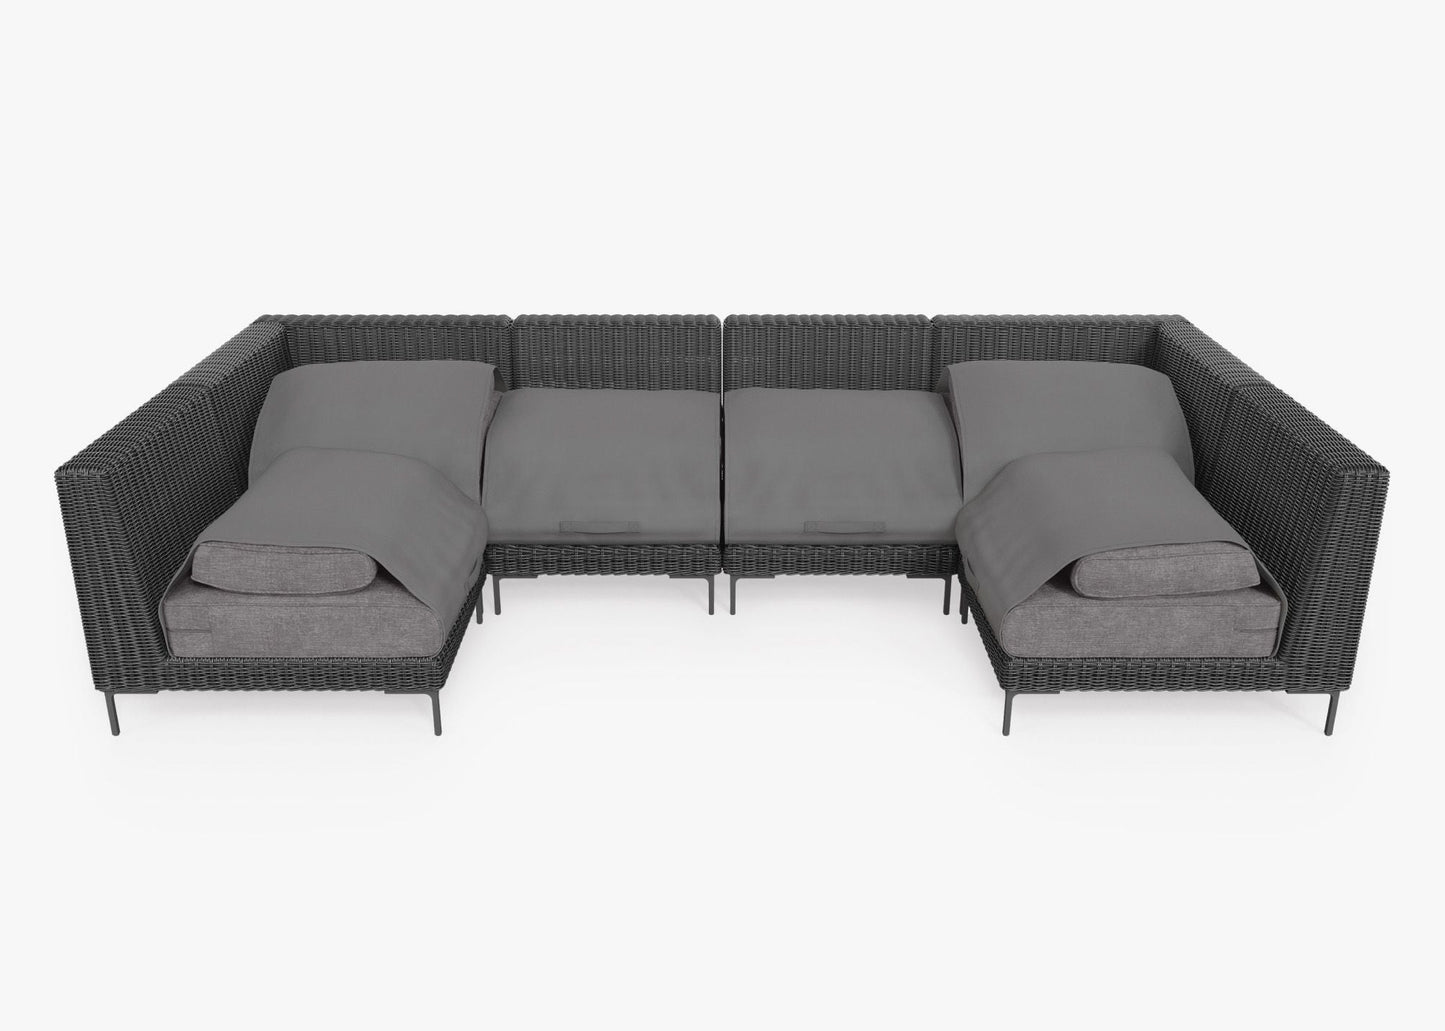 Live Outer 132" x 66" Black Wicker Outdoor U Sectional 6-Seat With Dark Pebble Gray Cushion